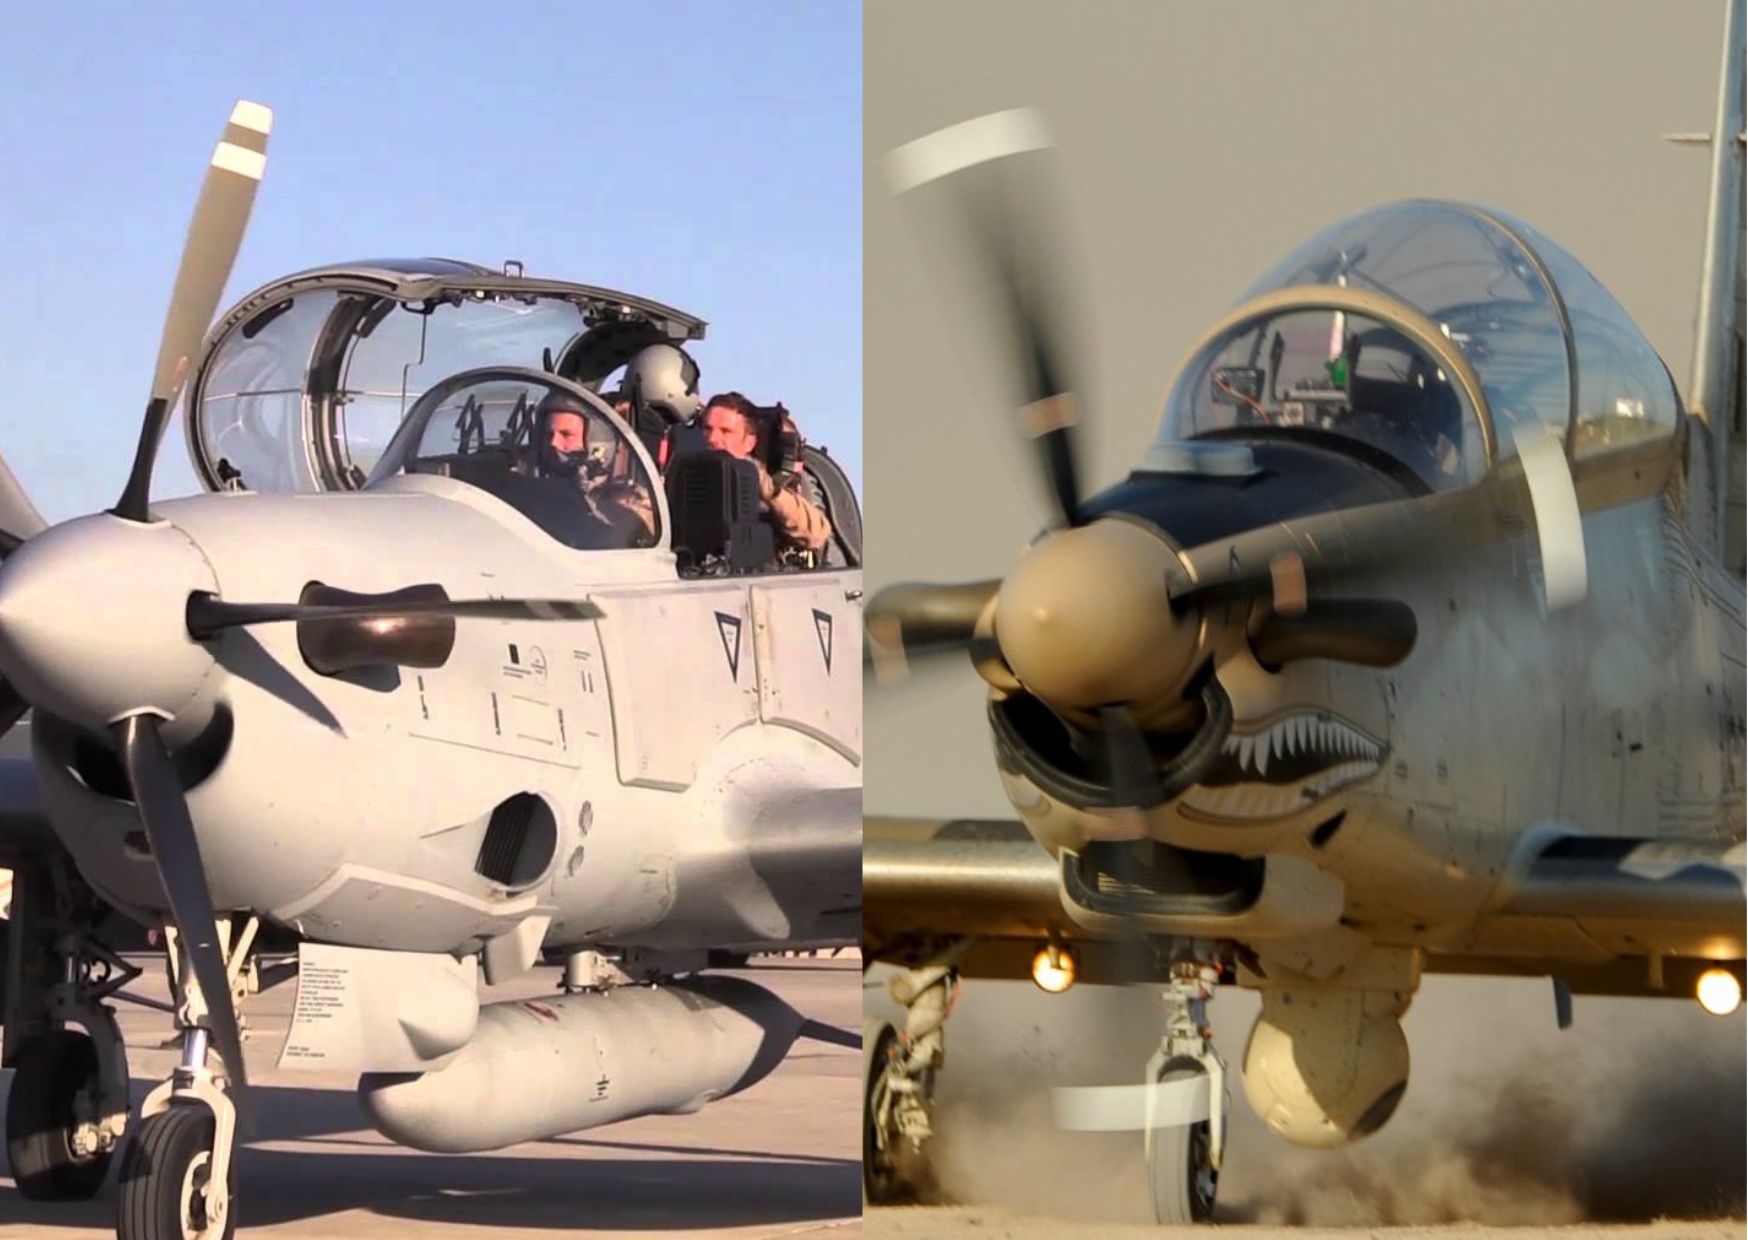 A-29 Super Tucano and AT-6 Wolverine